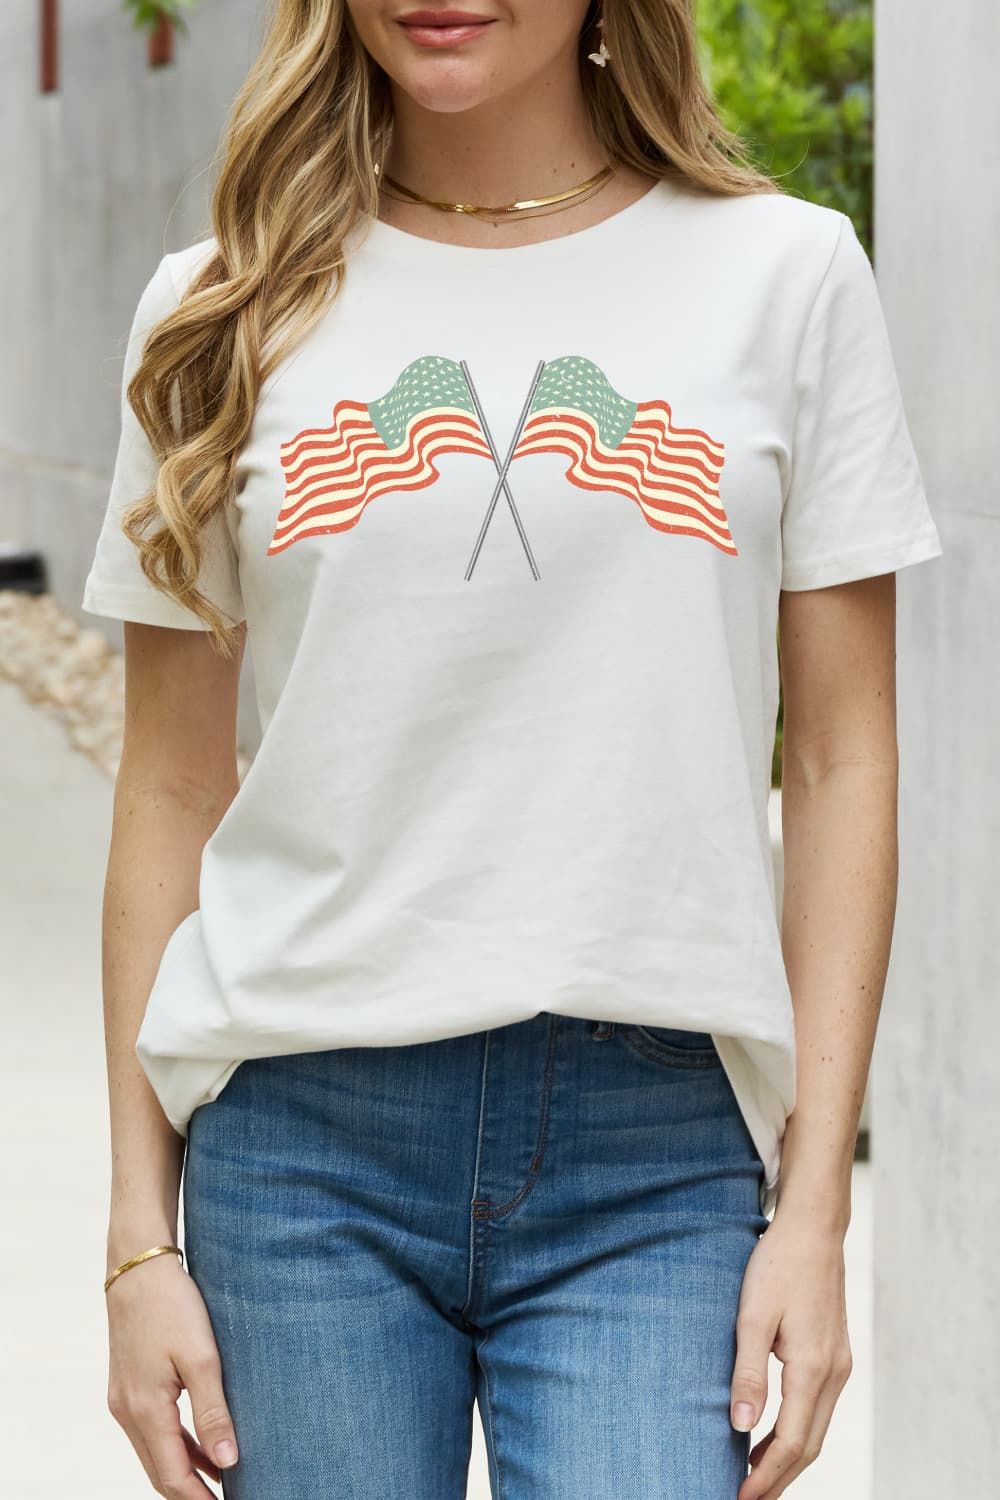 Women Simply Love US Flag Graphic Cotton Tee